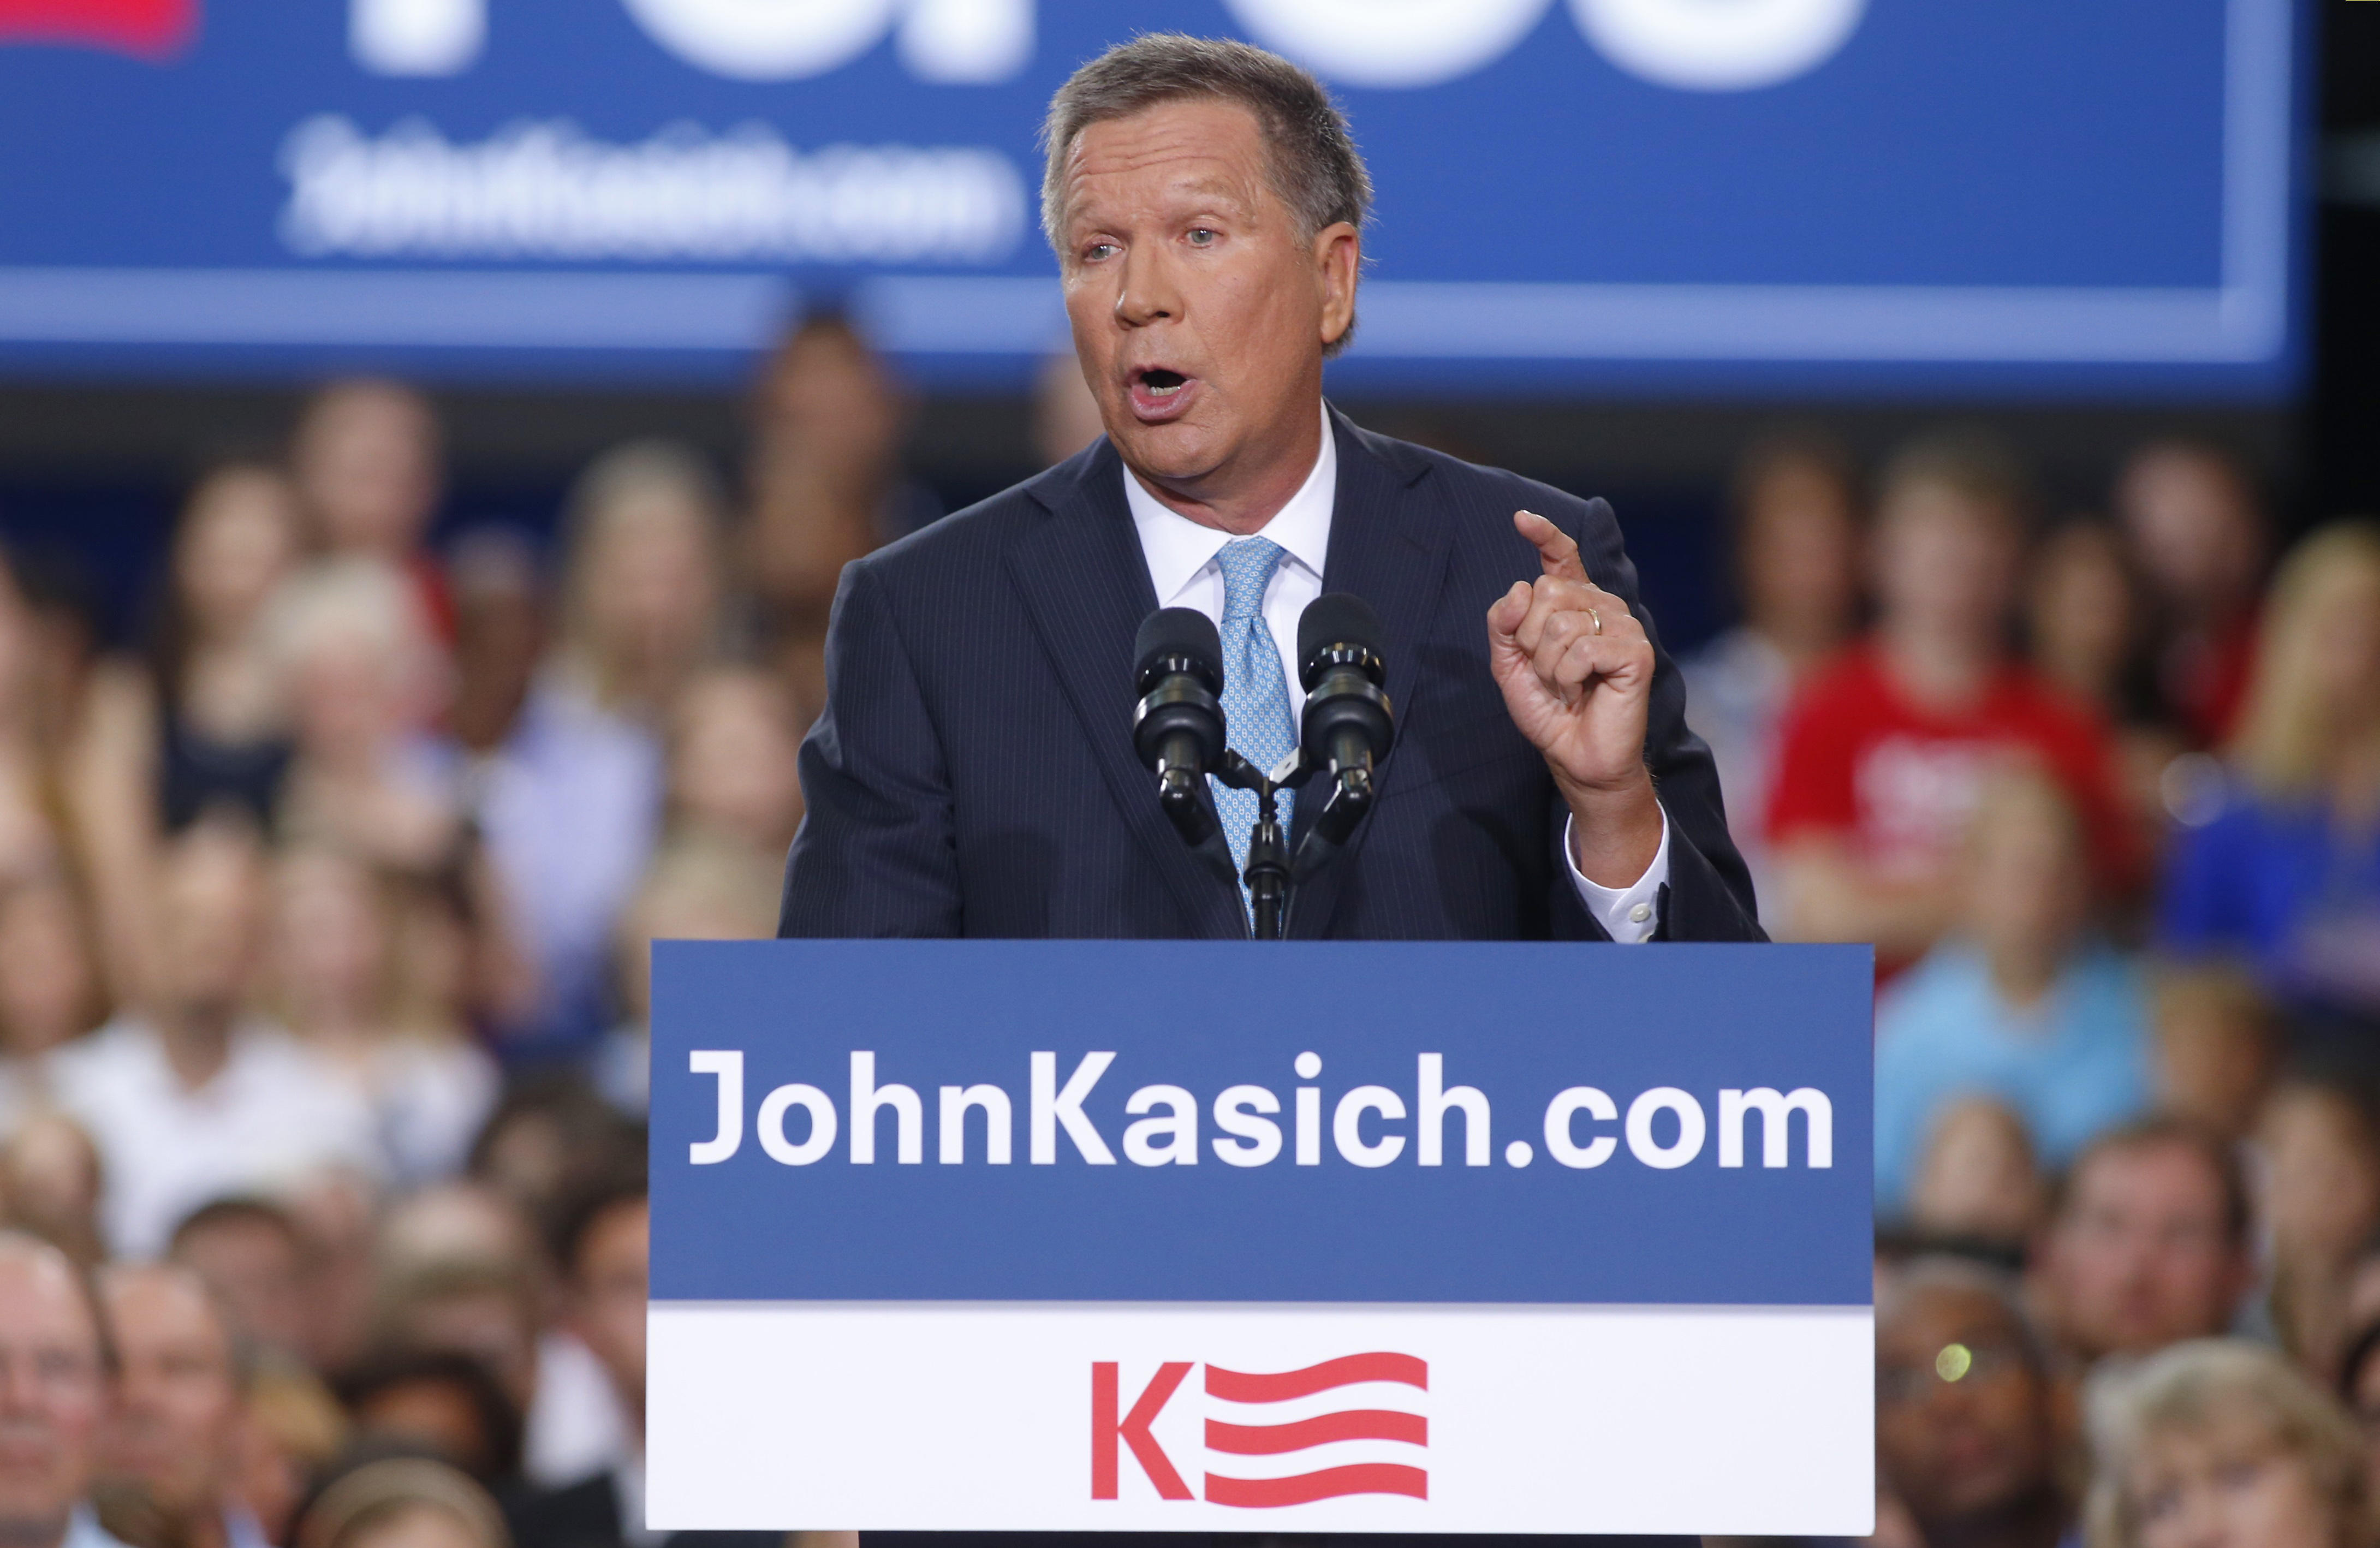 Republican presidential candidate and Ohio Governor John Kasich formally announces his campaign for the 2016 Republican presidential nomination. (Aaron Bernstein—Reuters)